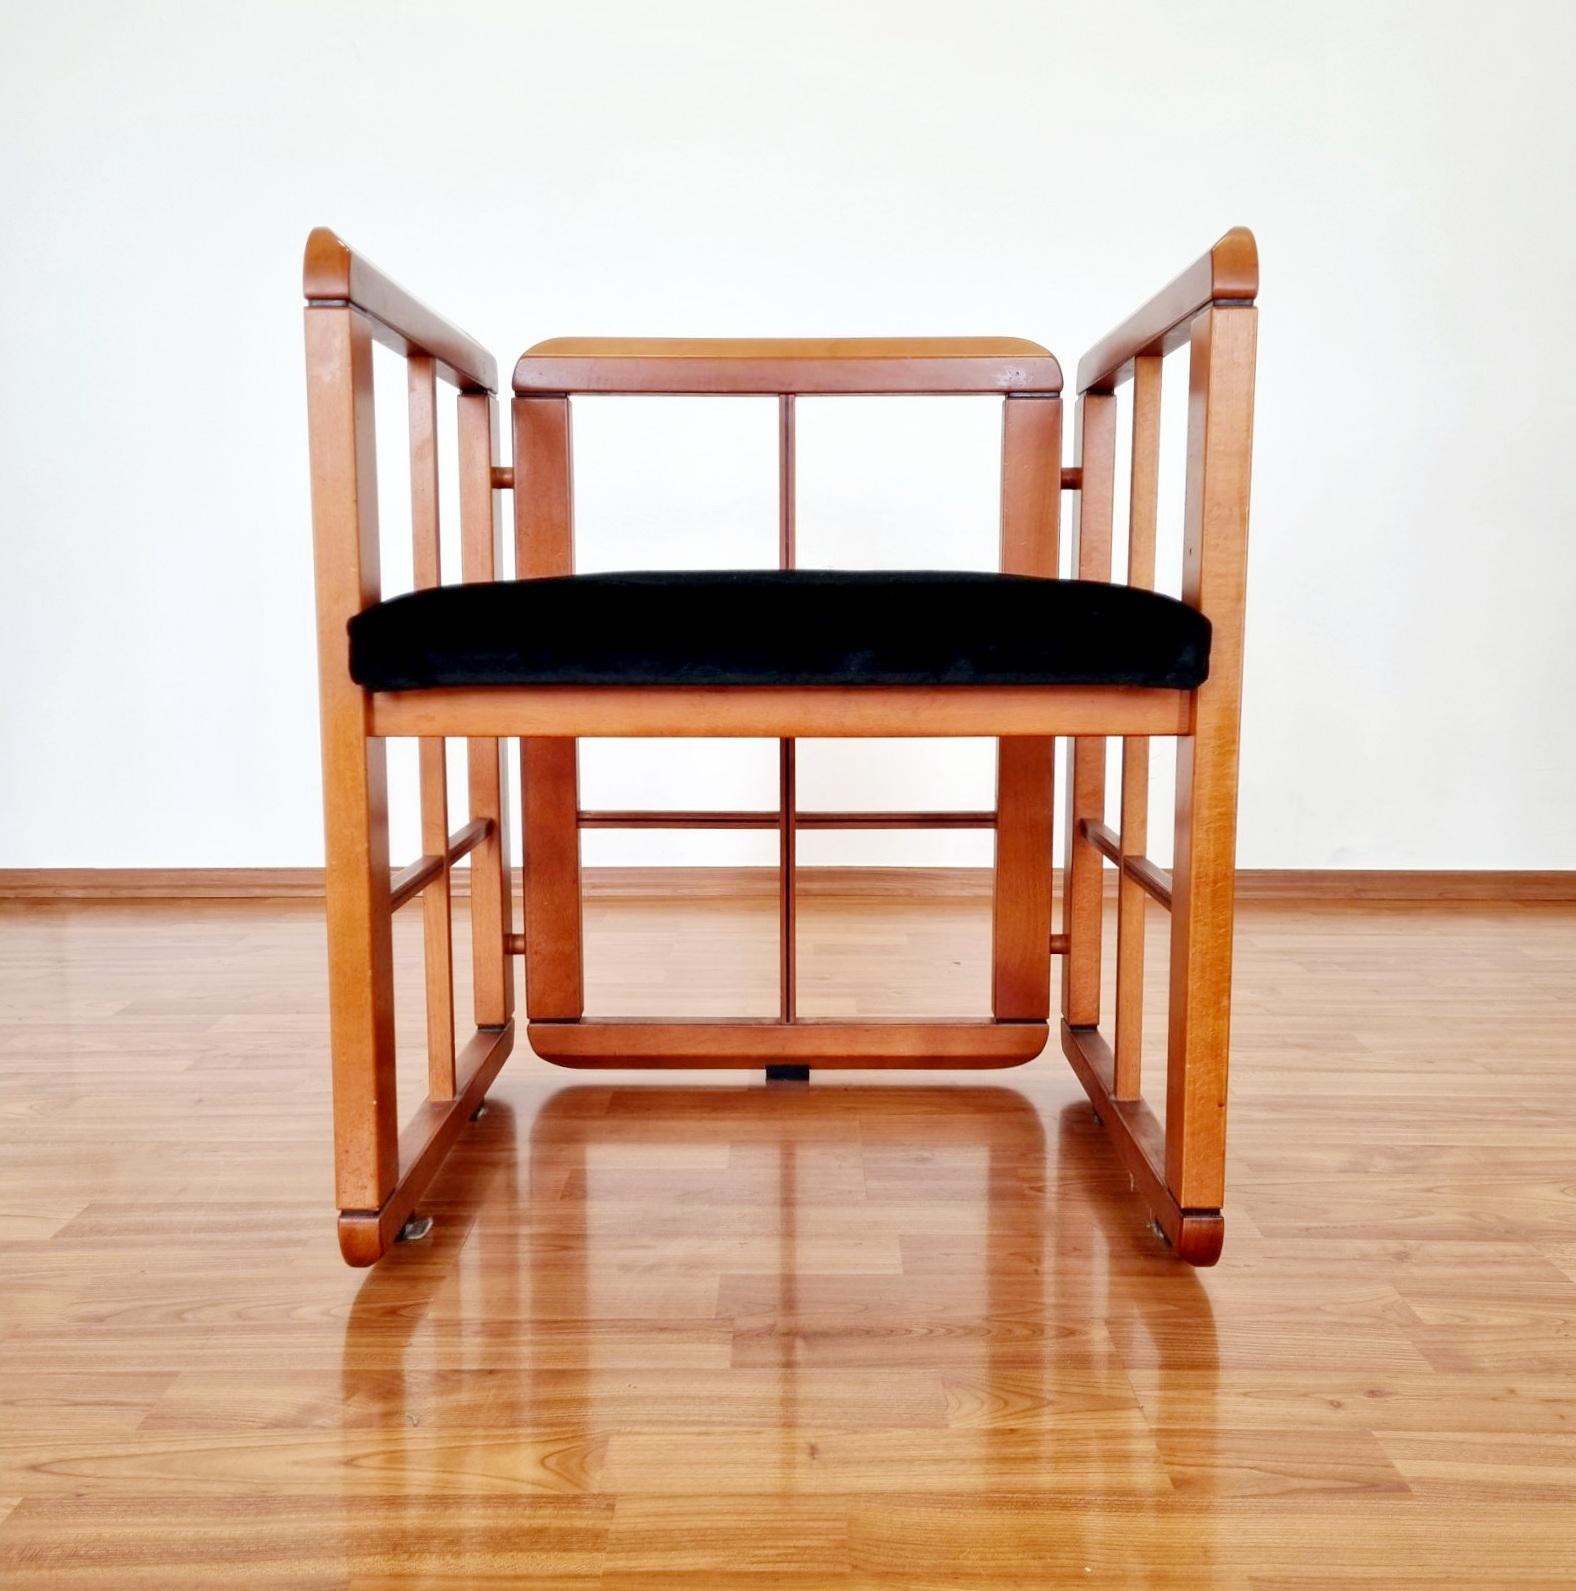 Post-Modern side, dining or desk armchair from the Caccia alla volpe furniture series, Italy 80s.
Designed by Franco Poldaretti
In very good condition.